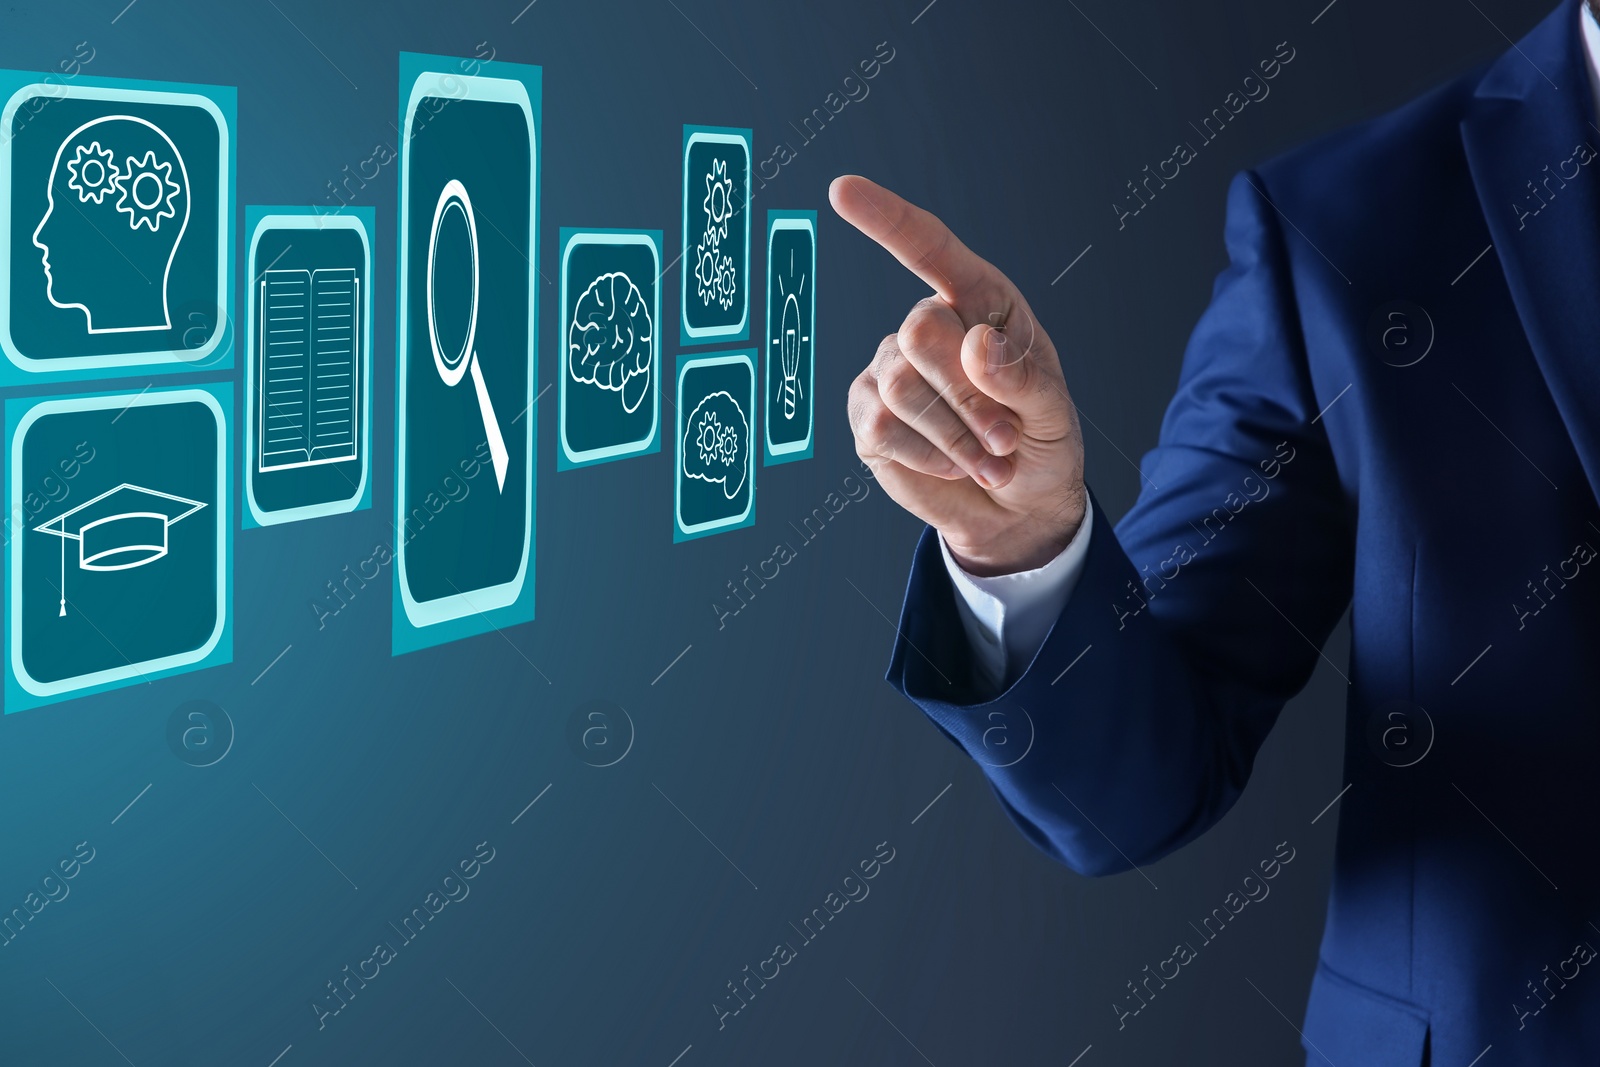 Image of E-learning. Man using virtual screen with different icons on dark background, closeup